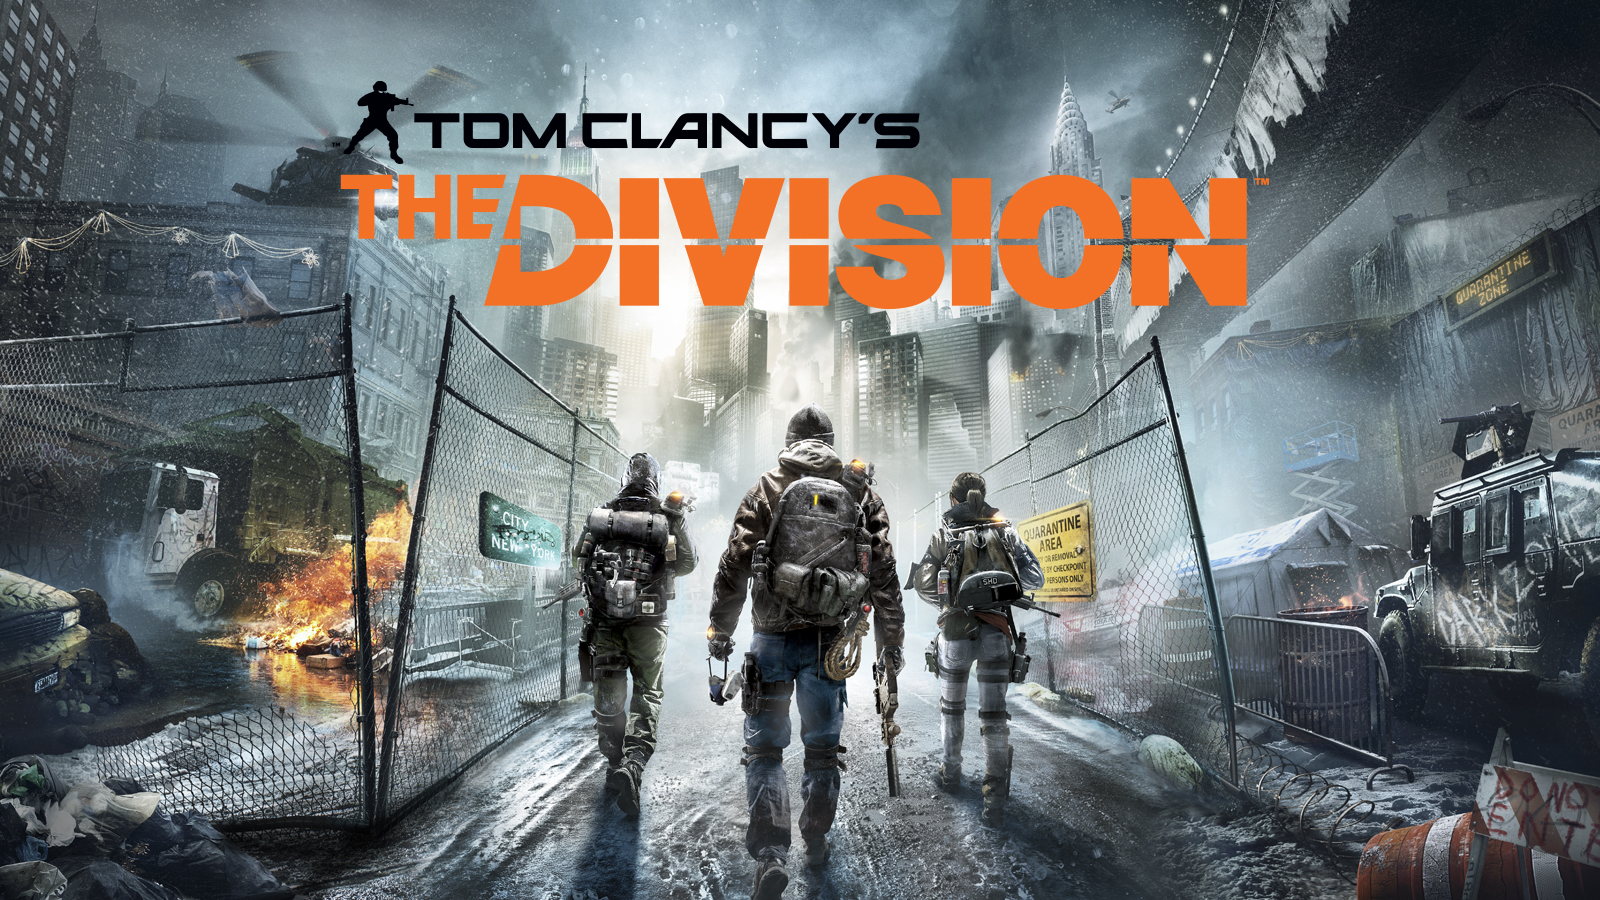 https://media.playstation.com/is/image/SCEA/tom-clancys-the-division-listing-thumb-01-ps4-us-15jun15?$Icon$